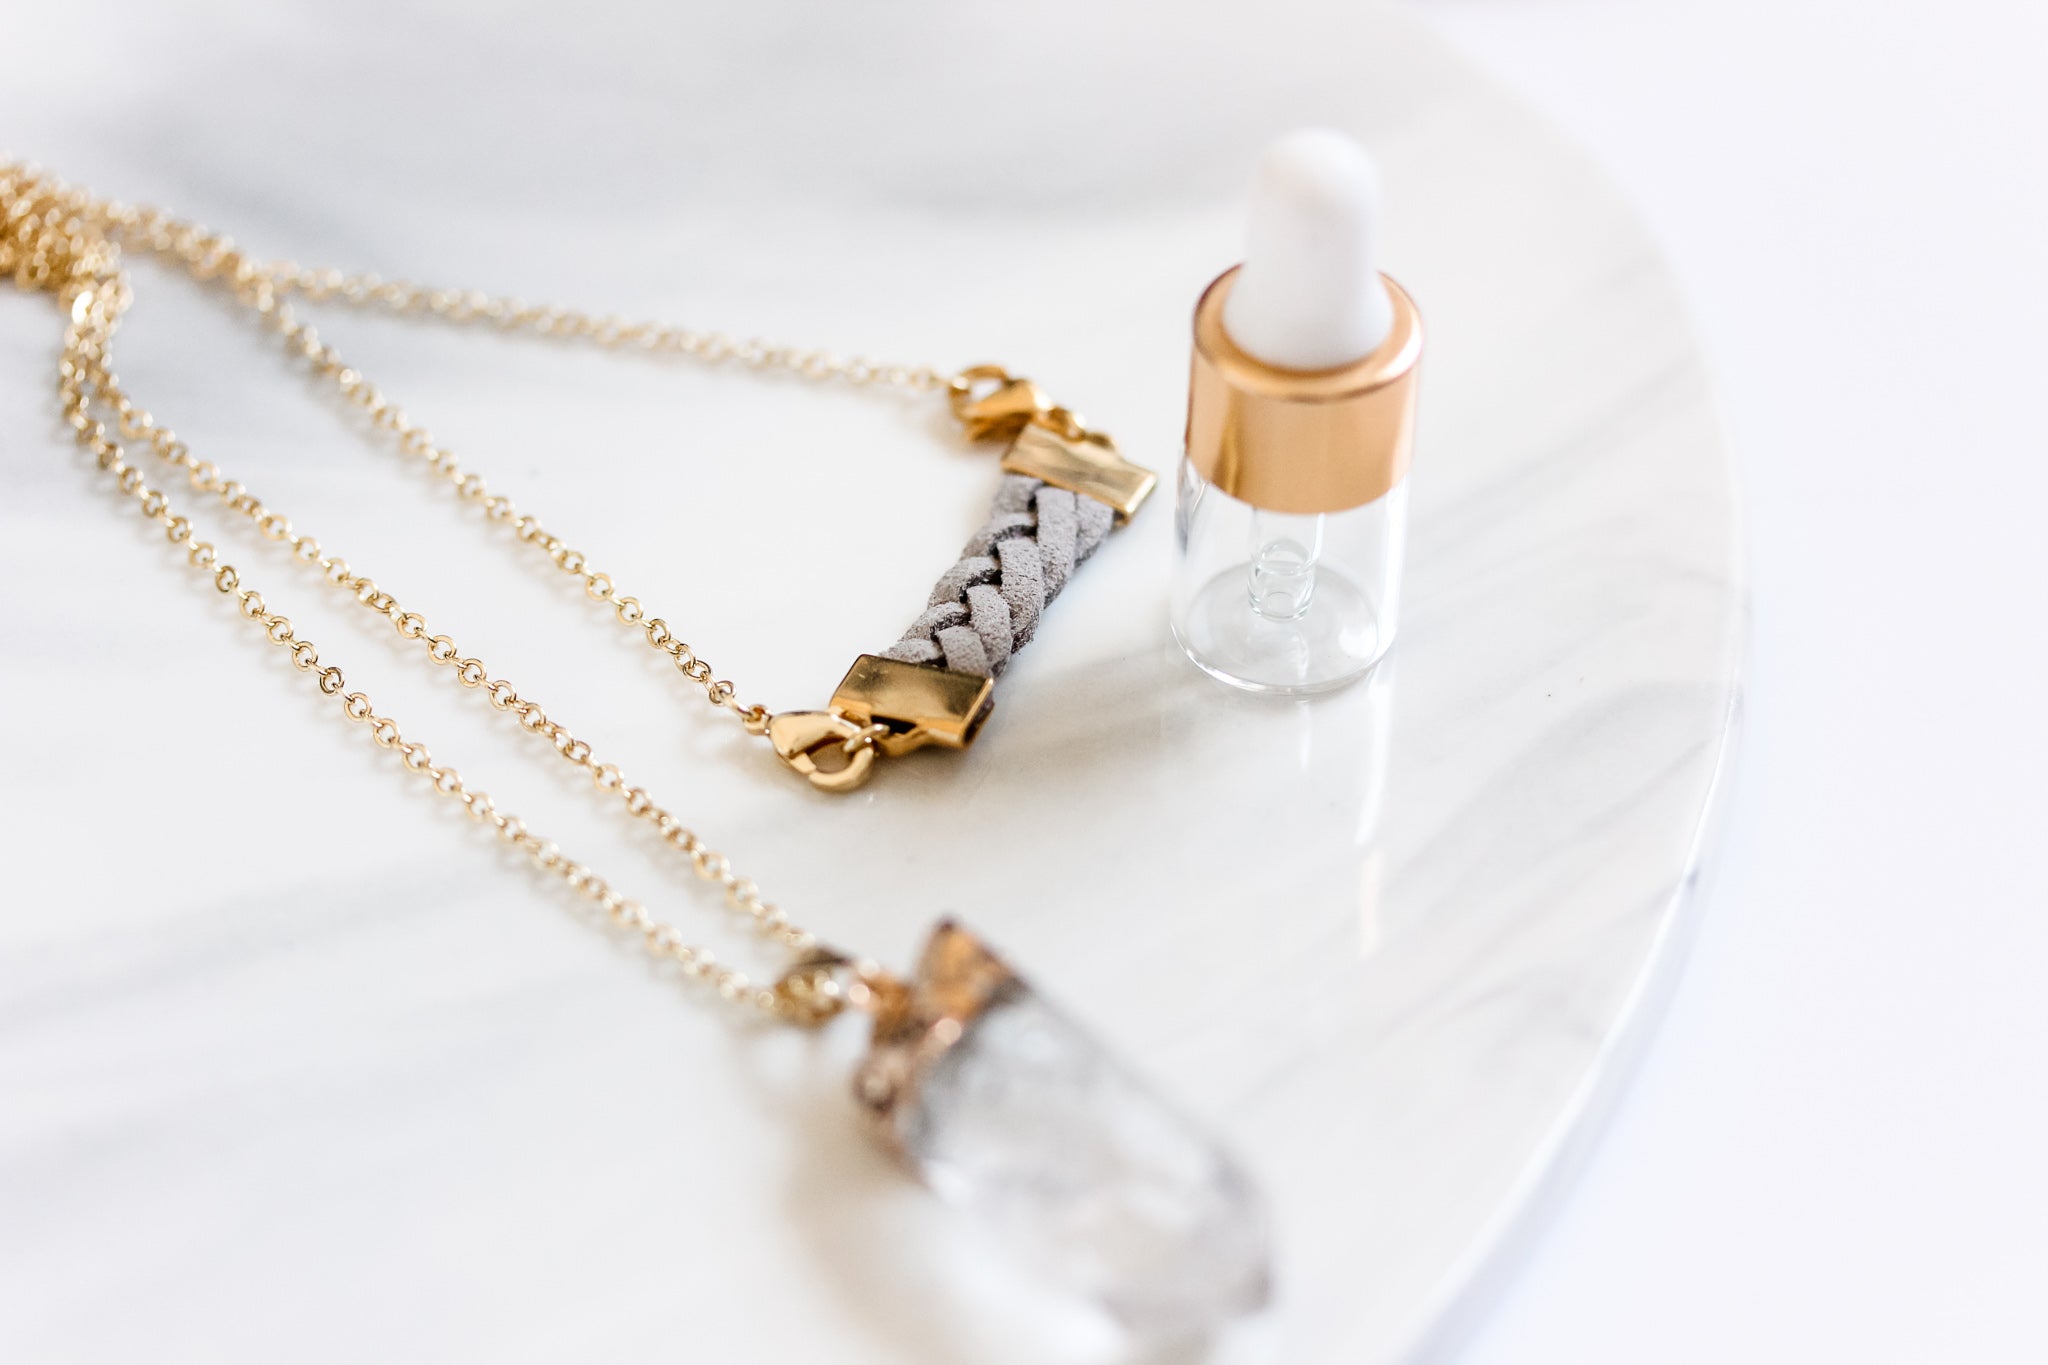 Diffuser Necklace Extender - Put on Love Designs